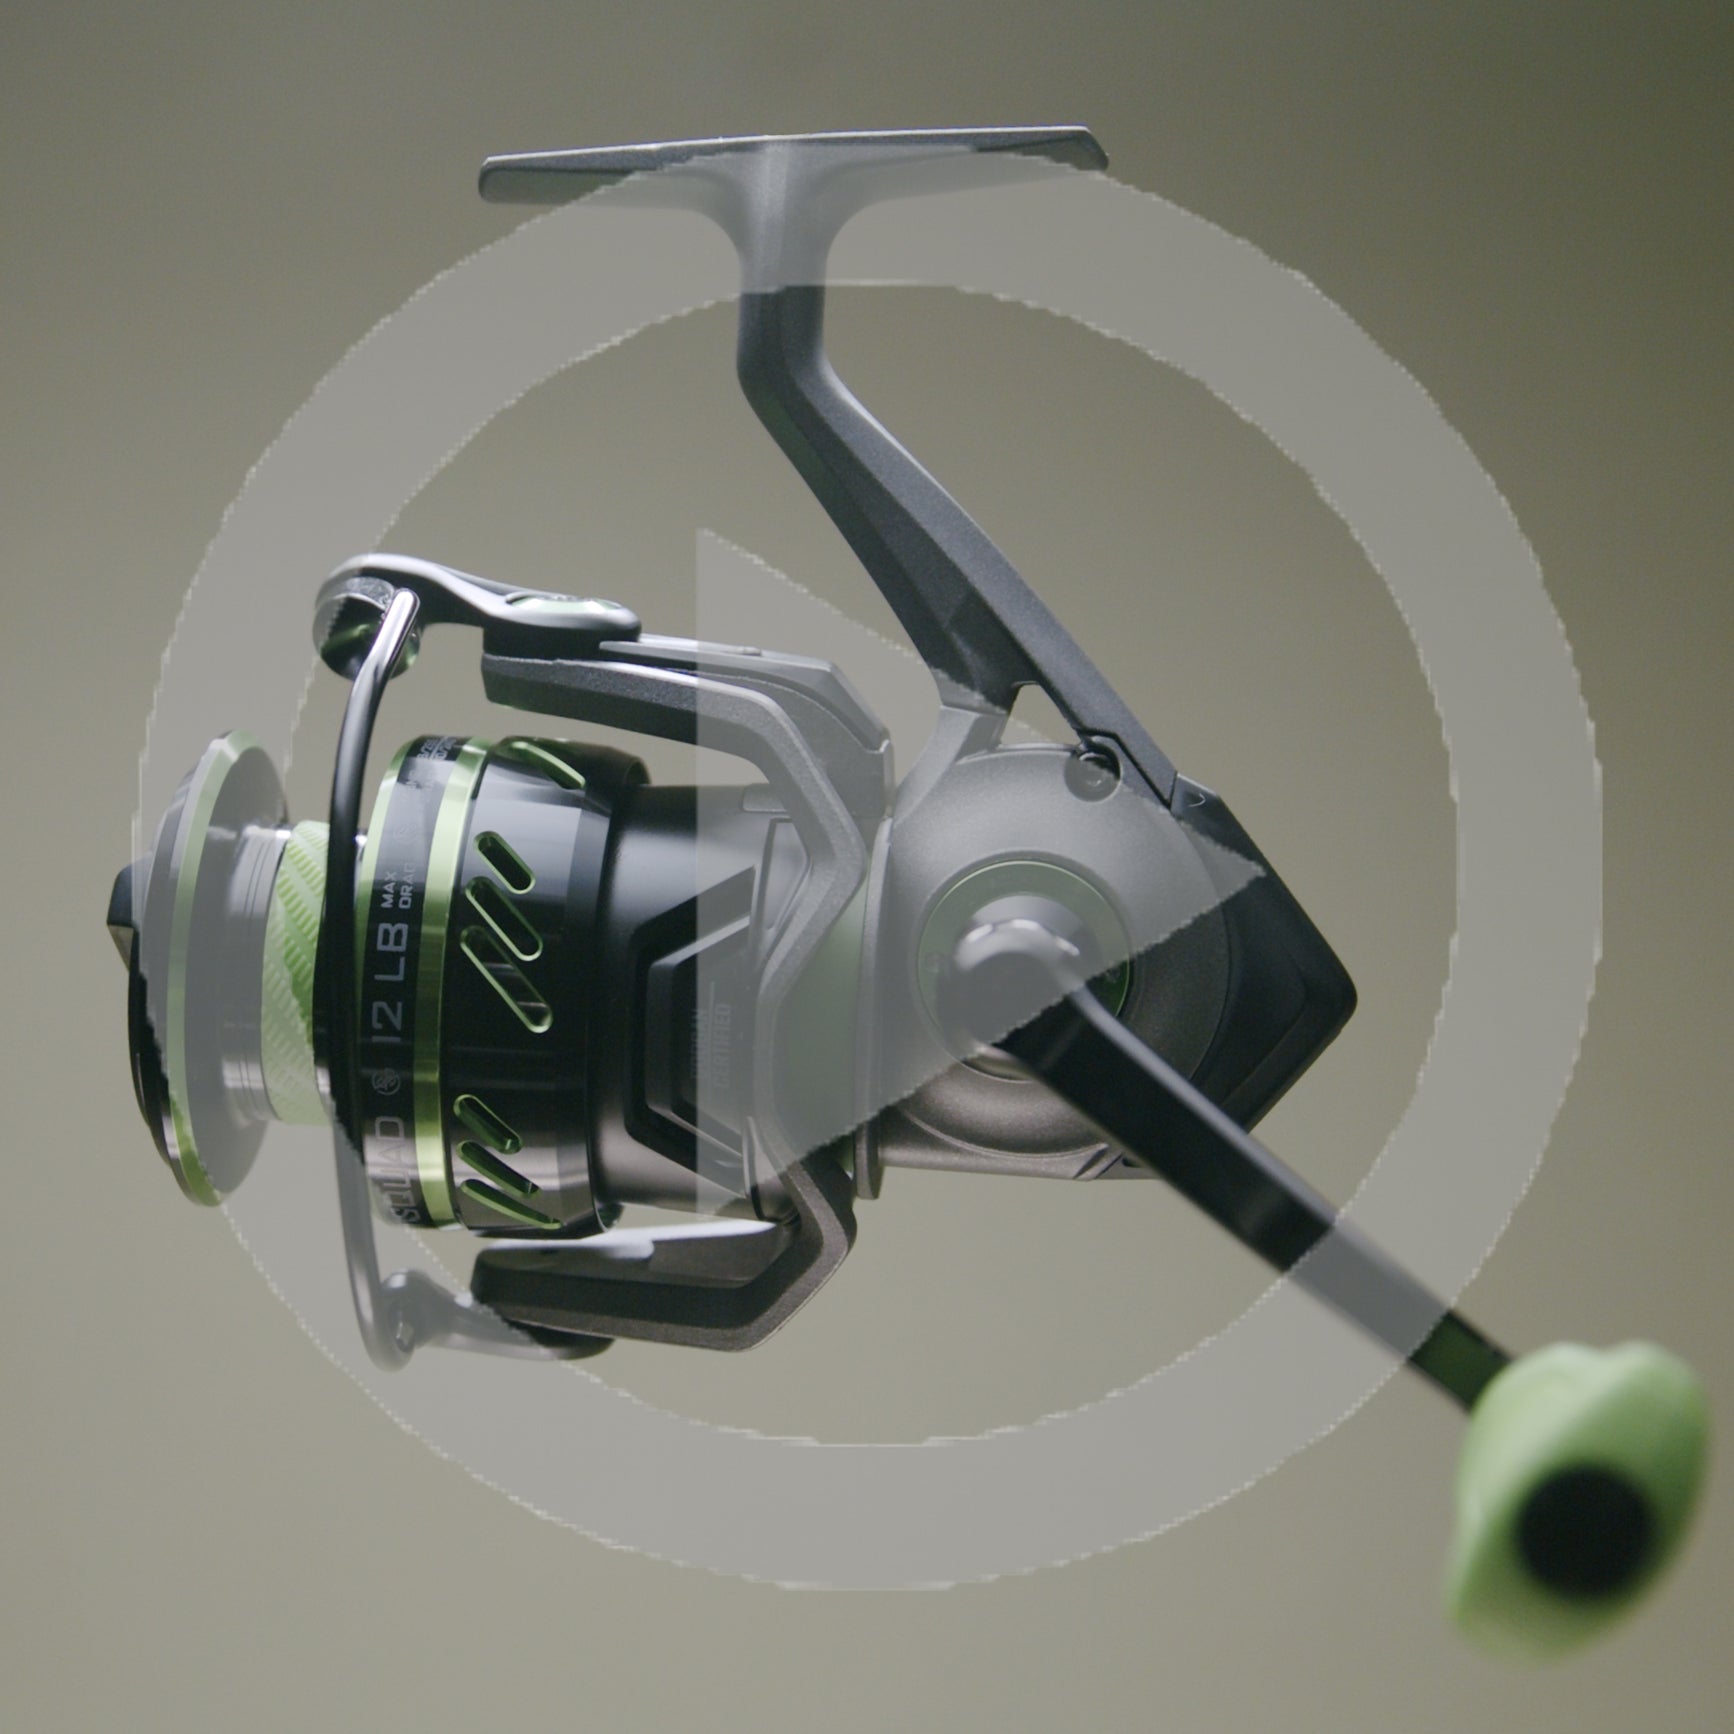 Buy New Design High Quality One-way Bearing Spinning Fishing Reel Left/right  Hand Aluminum Outdoor Fishing Reel 1000-7000 from Cixi Dongmeng Fishing  Tackle Factory, China